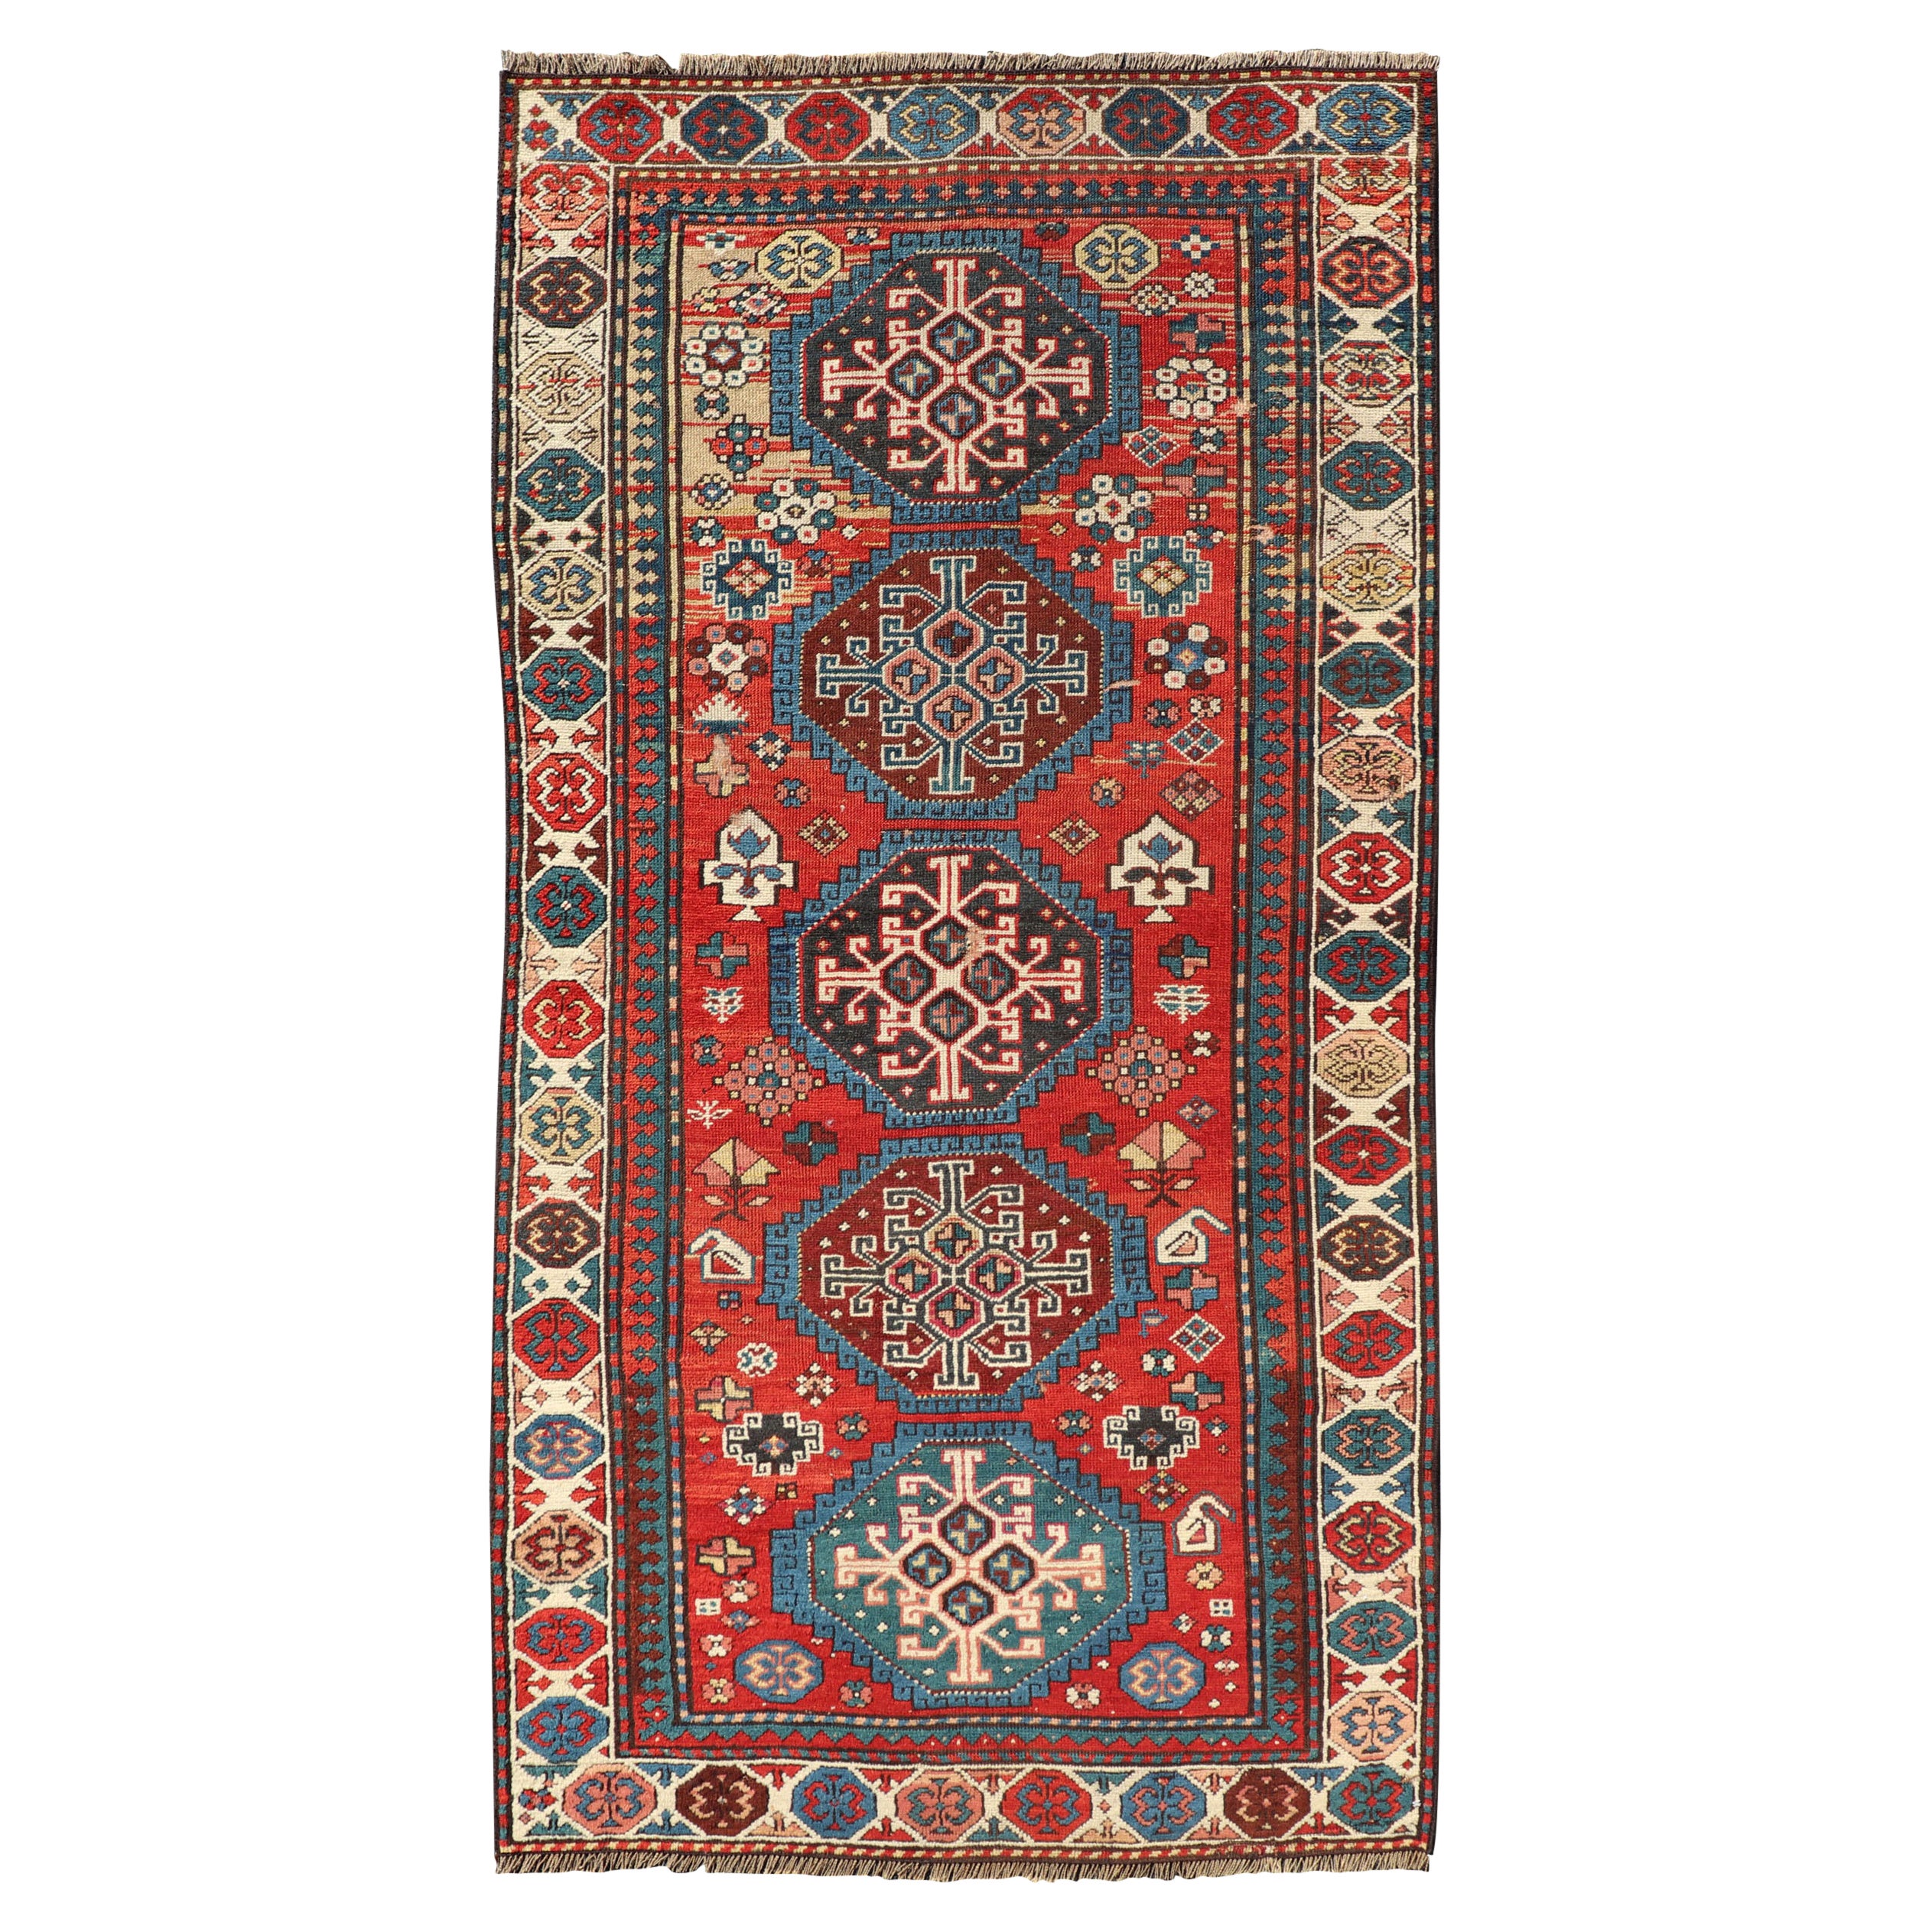 Antique Hand Knotted Caucasian Kazak Rug in Brilliant Red with Geometric Design For Sale